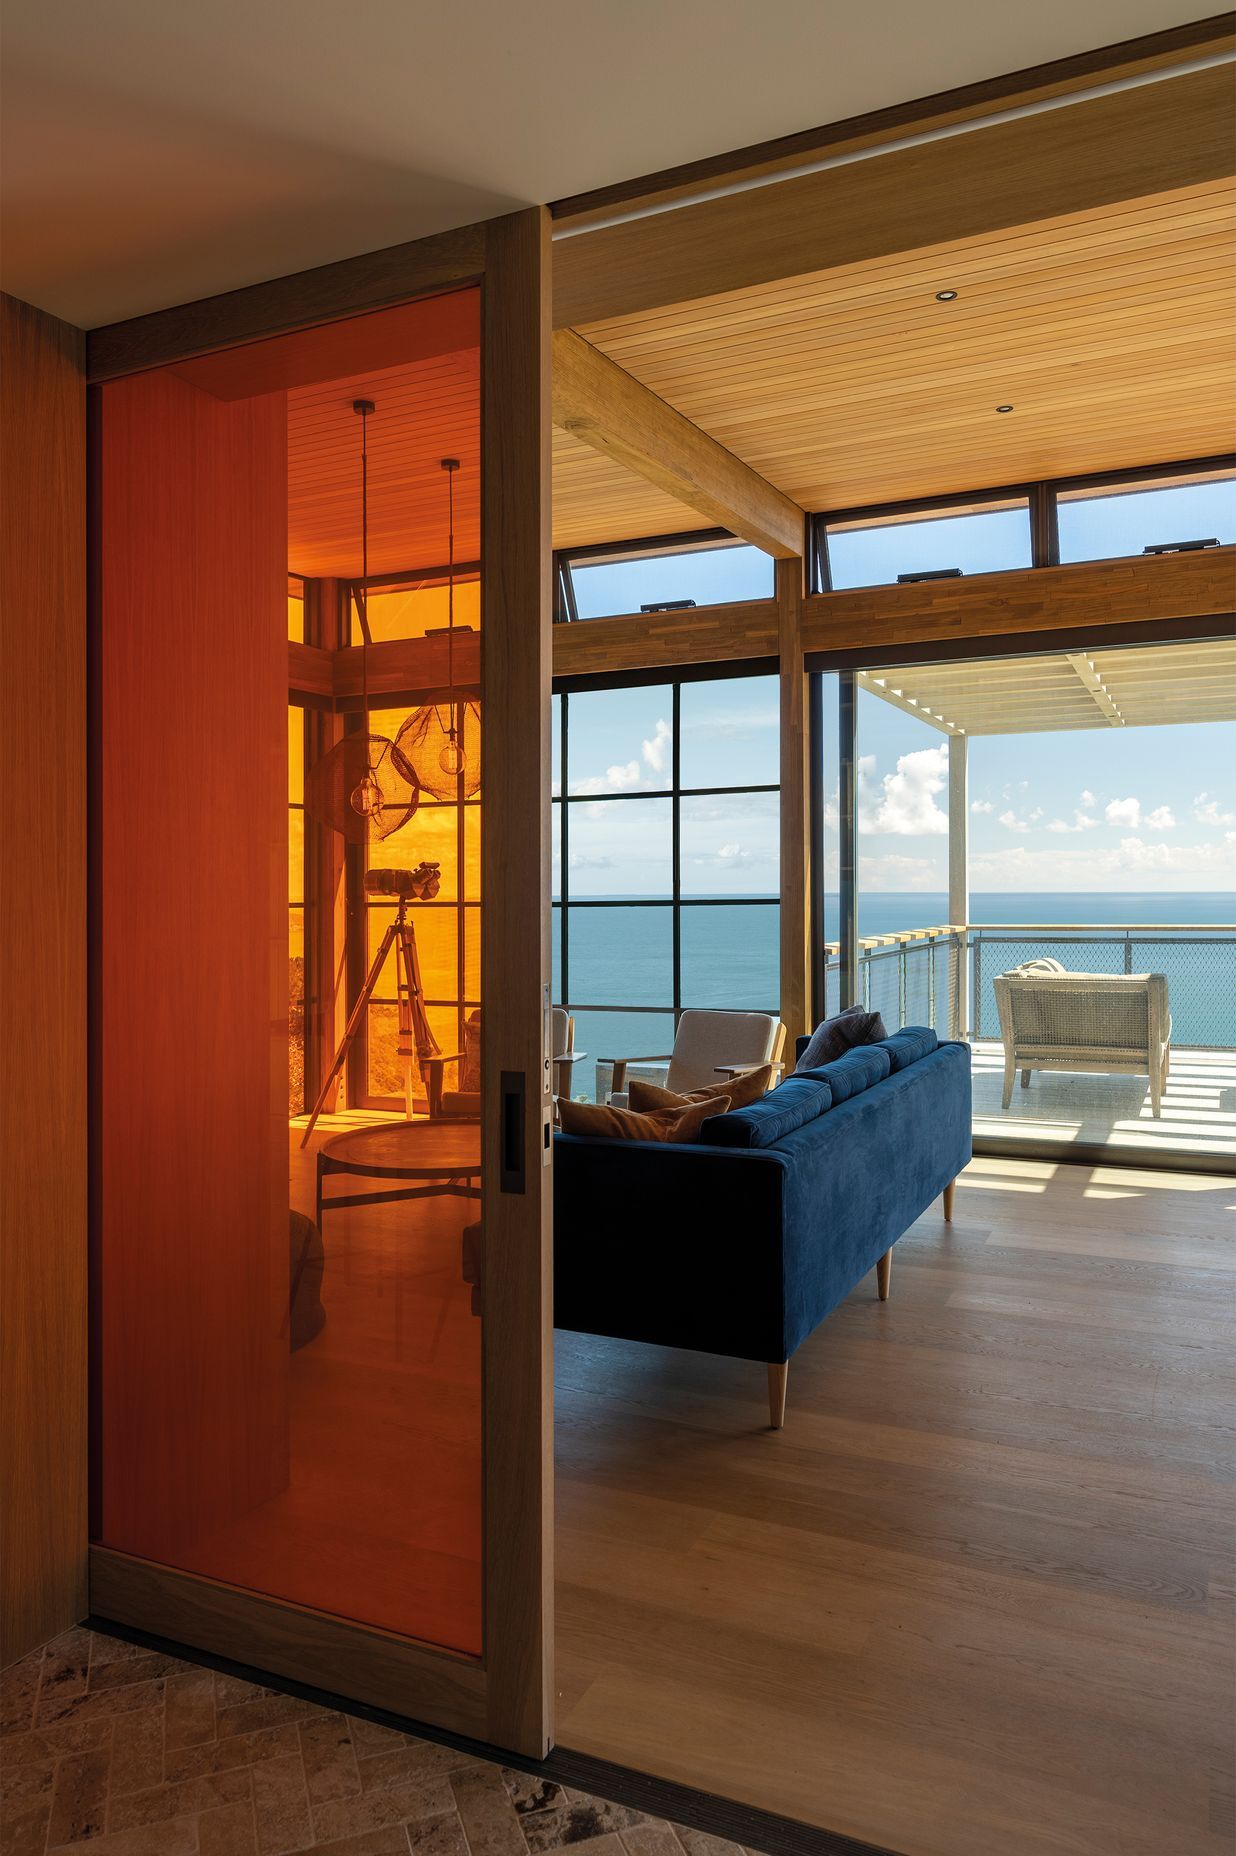 A vibrant tangerine door can be used to separate the living area.